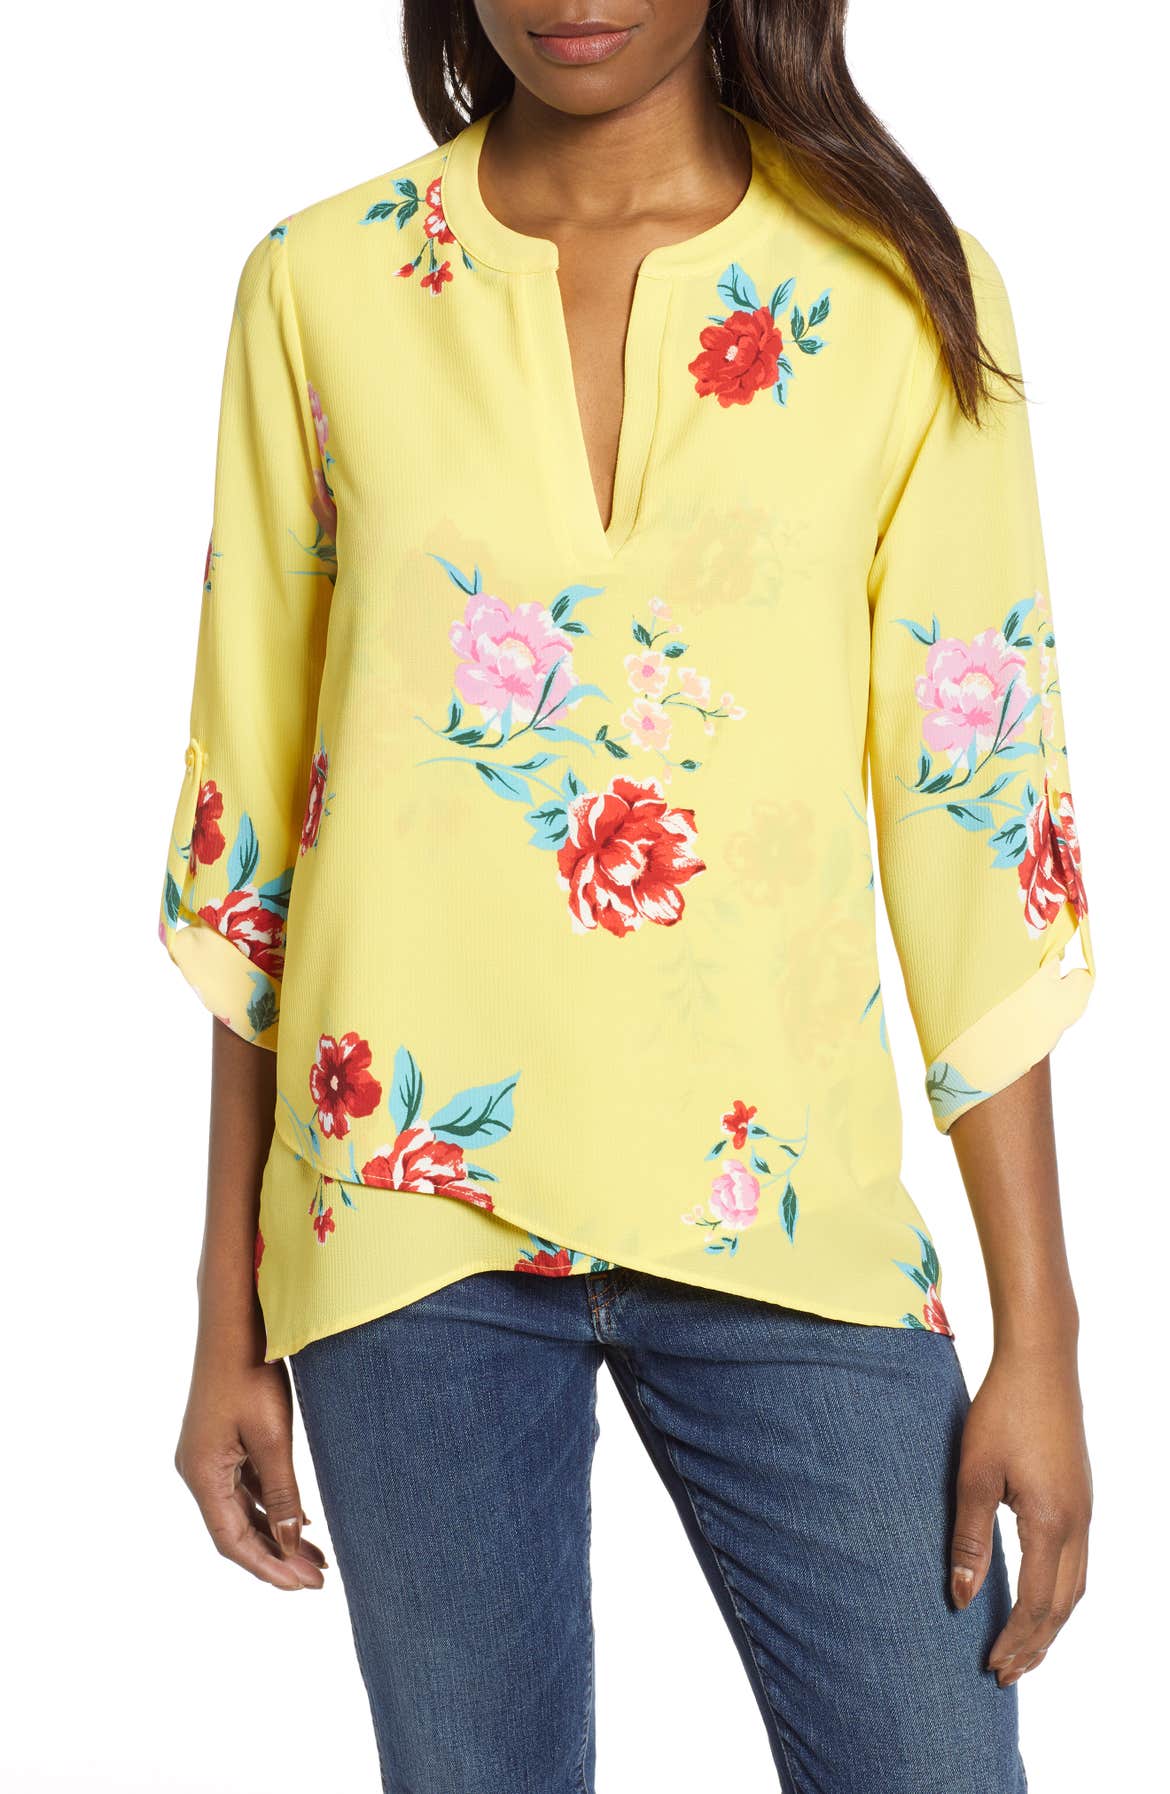 GIBSON x International Women's Day Erin Cross Front Tunic Blouse, Main, color, VIRGINIA BLOOM